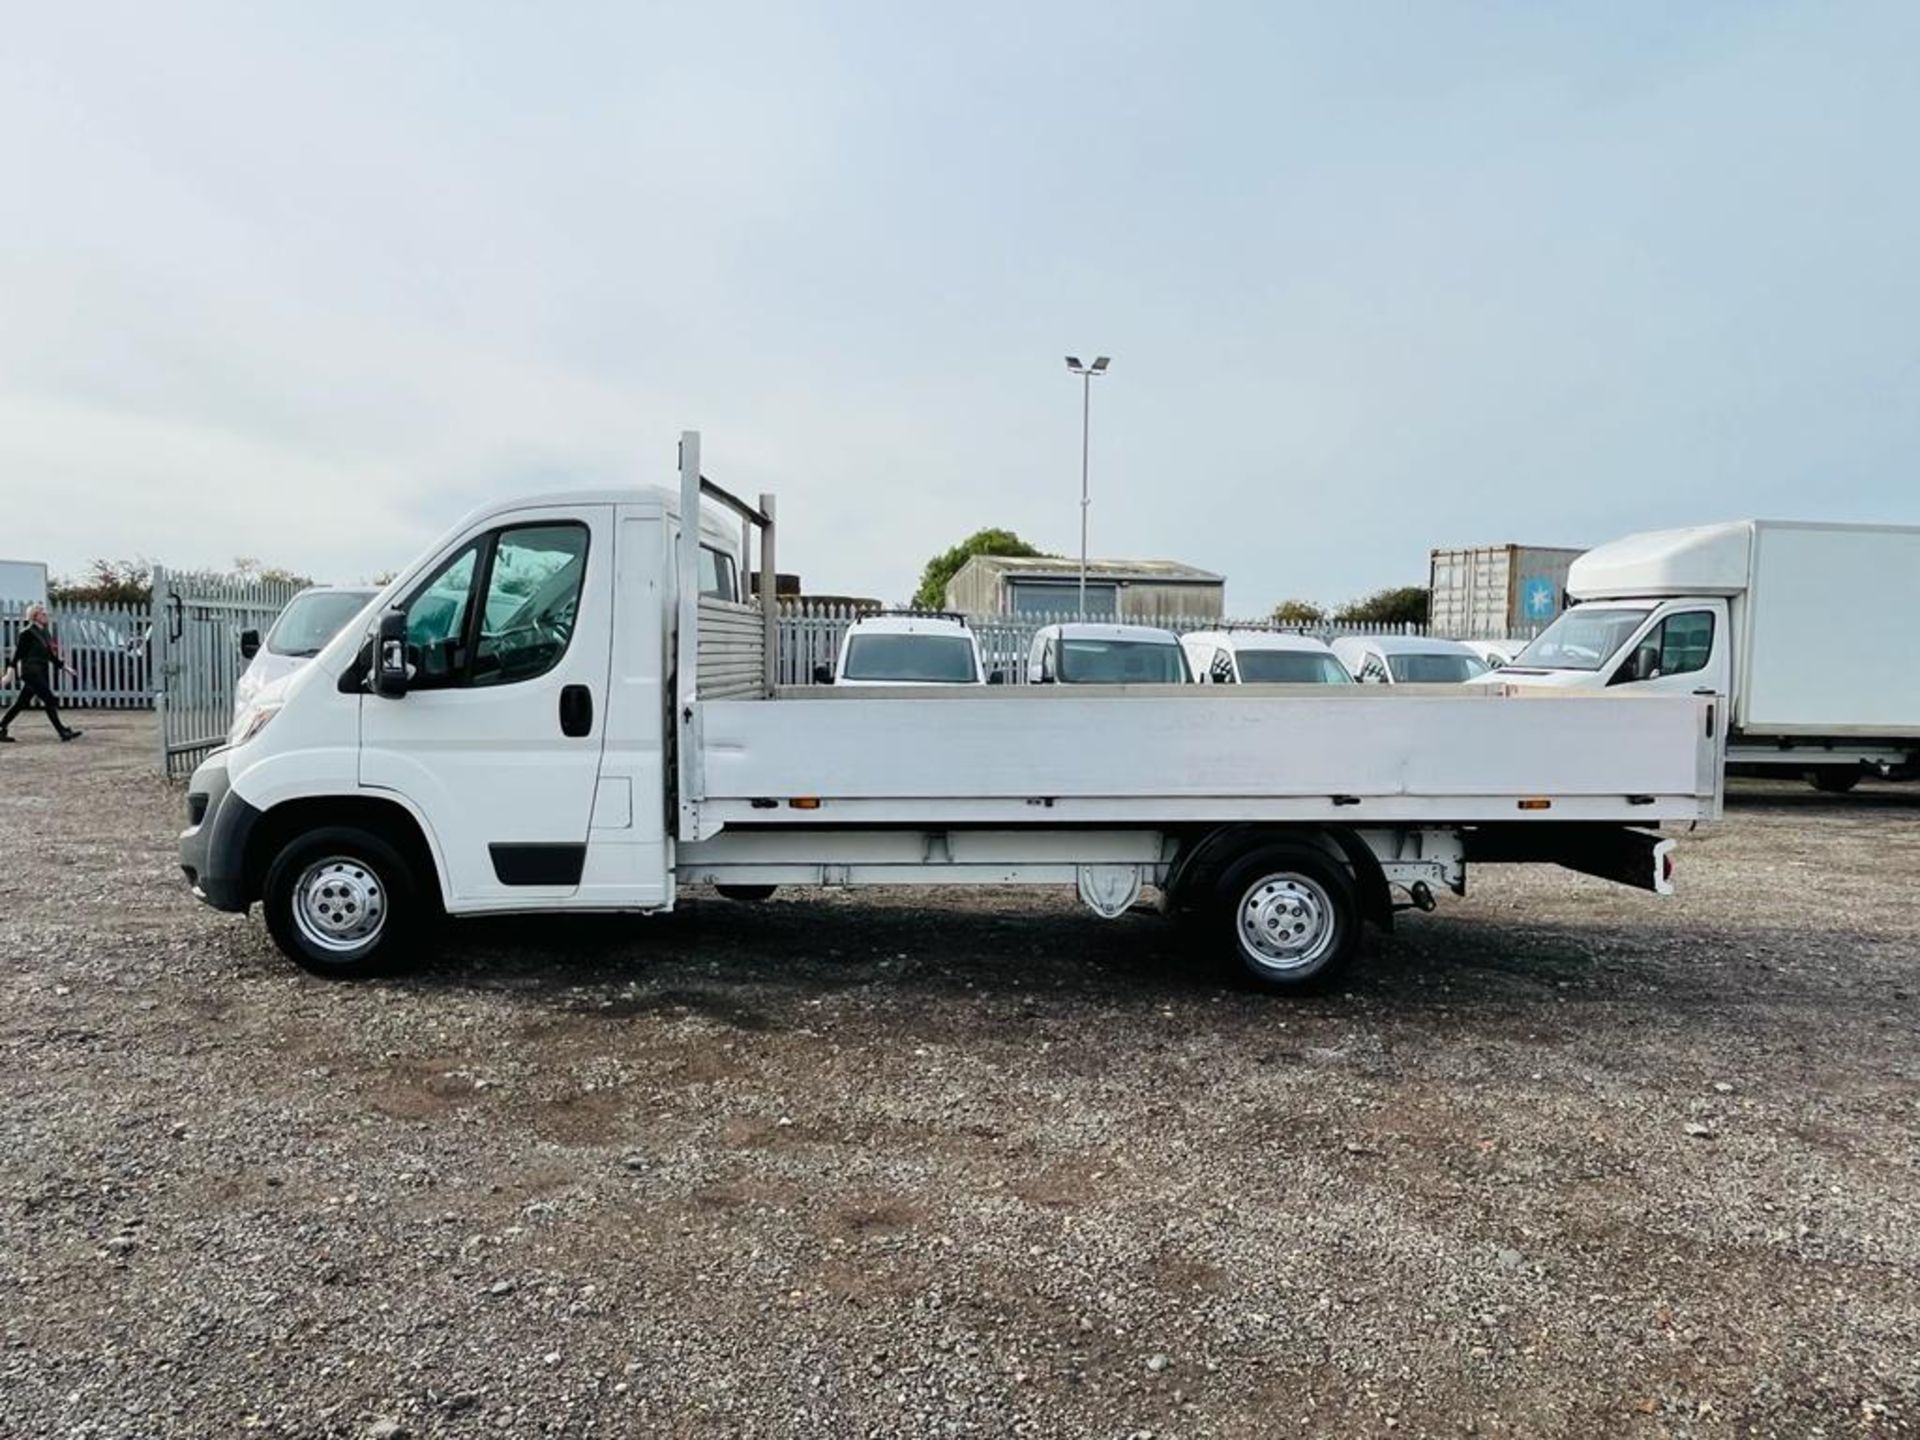 ** ON SALE ** CITROEN RELAY 35 2.2 HDI 130 L3 2015 (15 Reg) - Alloy Dropside - Bluetooth Pack - Image 5 of 24